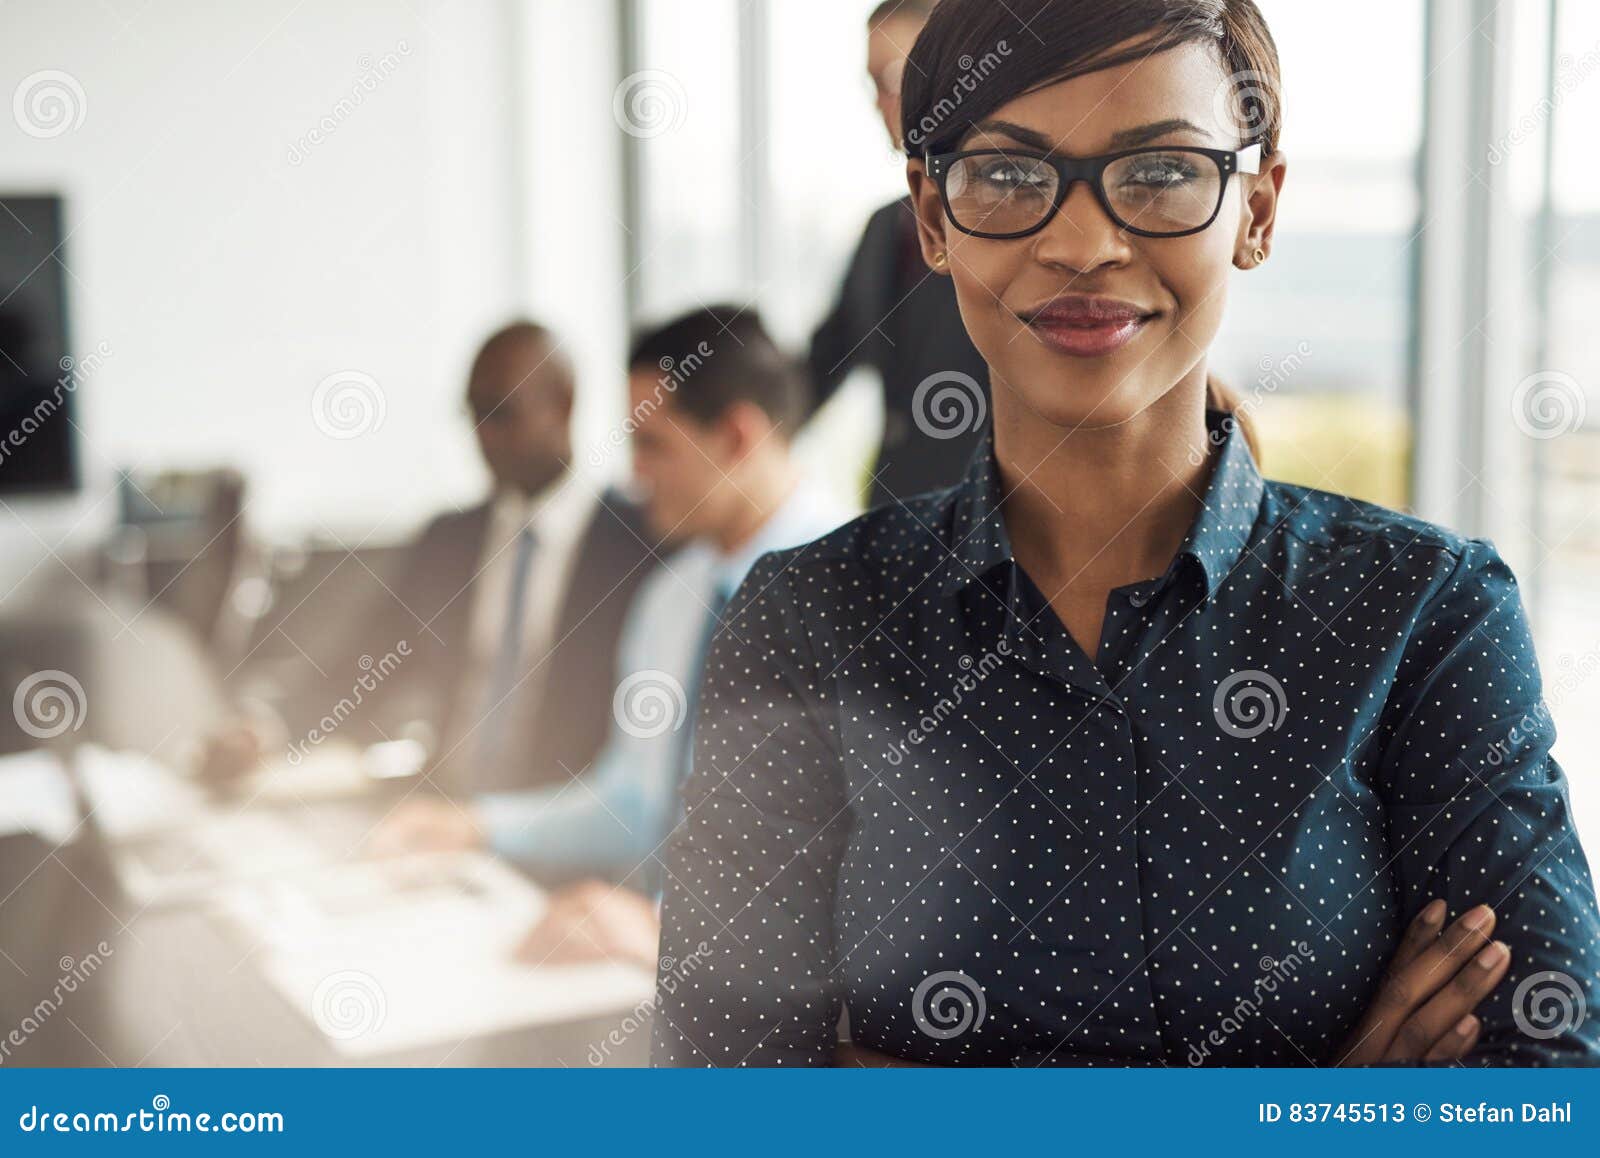 beautiful young professional woman in office